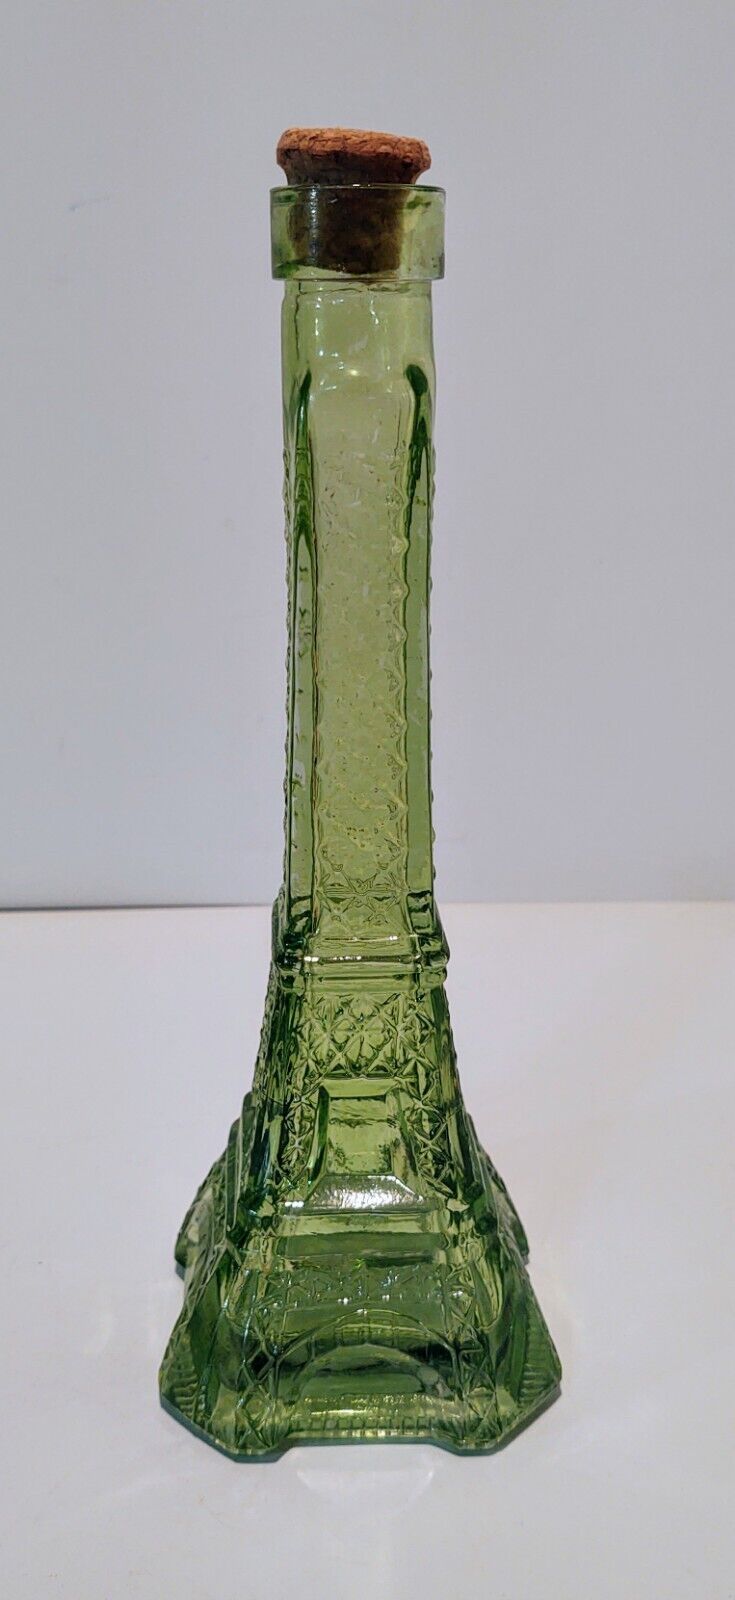 Vintage Green Glass Eiffel Tower Bottle/Decanter with Cork Stopper 